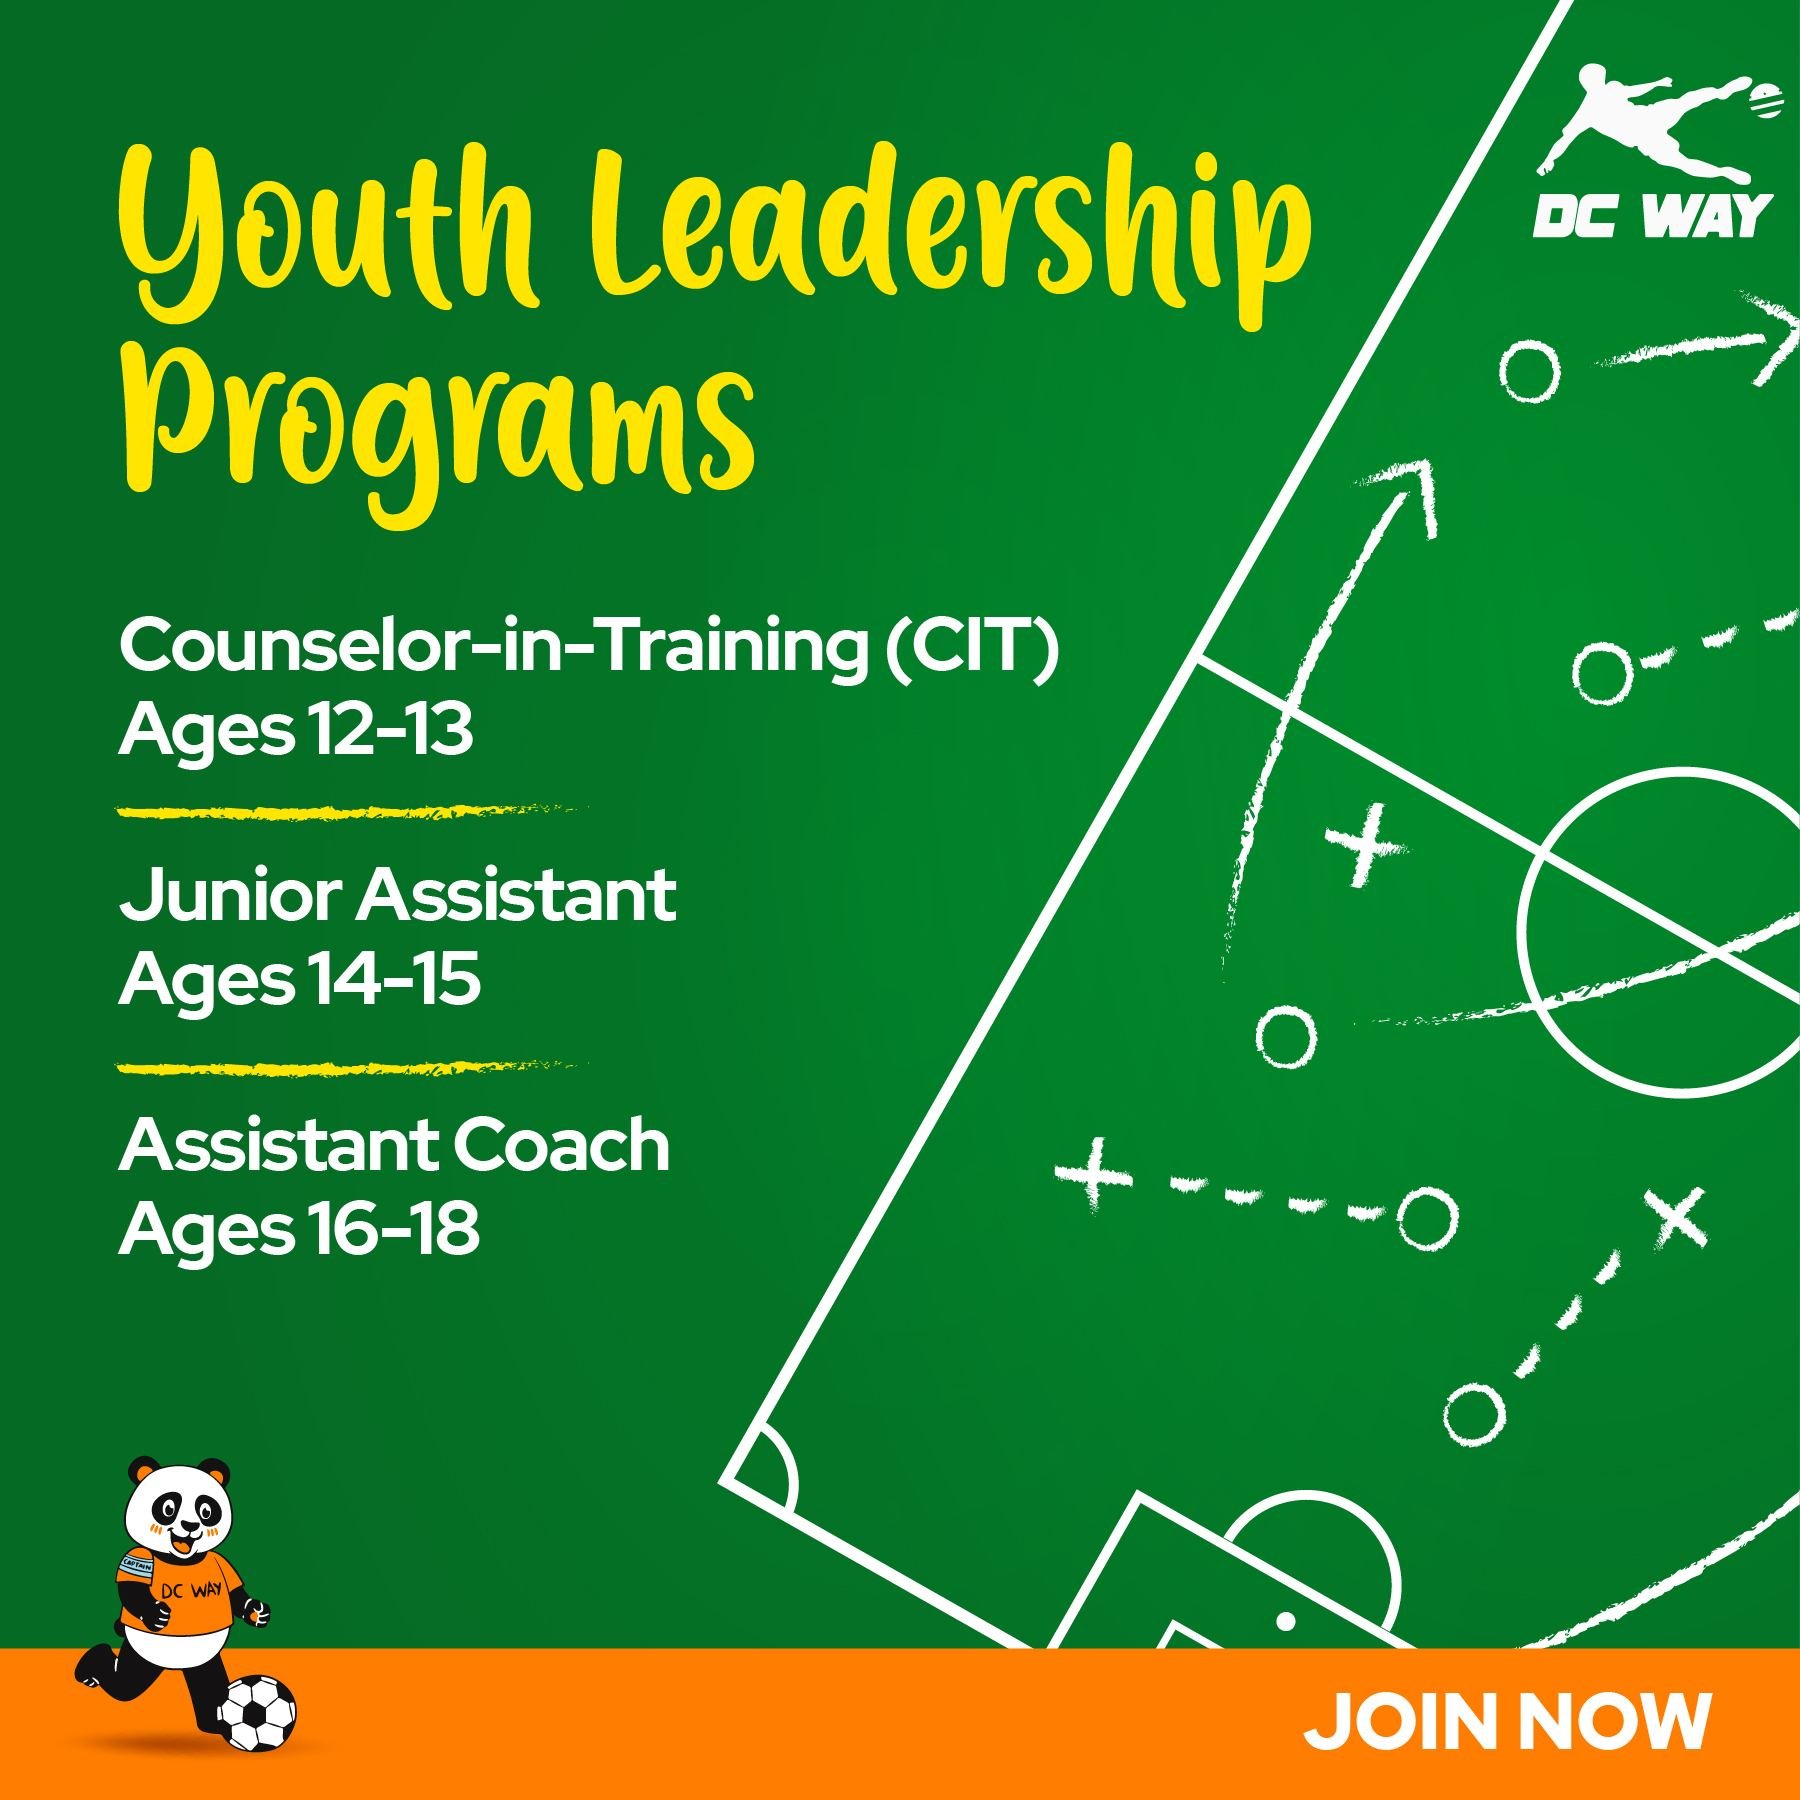 🌟 Ready to unlock your potential and shape the future of soccer leadership? 🚀 Discover DC Way's Youth Leadership Programs &ndash; an extraordinary opportunity for teens in the DMV area to gain work experience, earn volunteer hours for school, and d